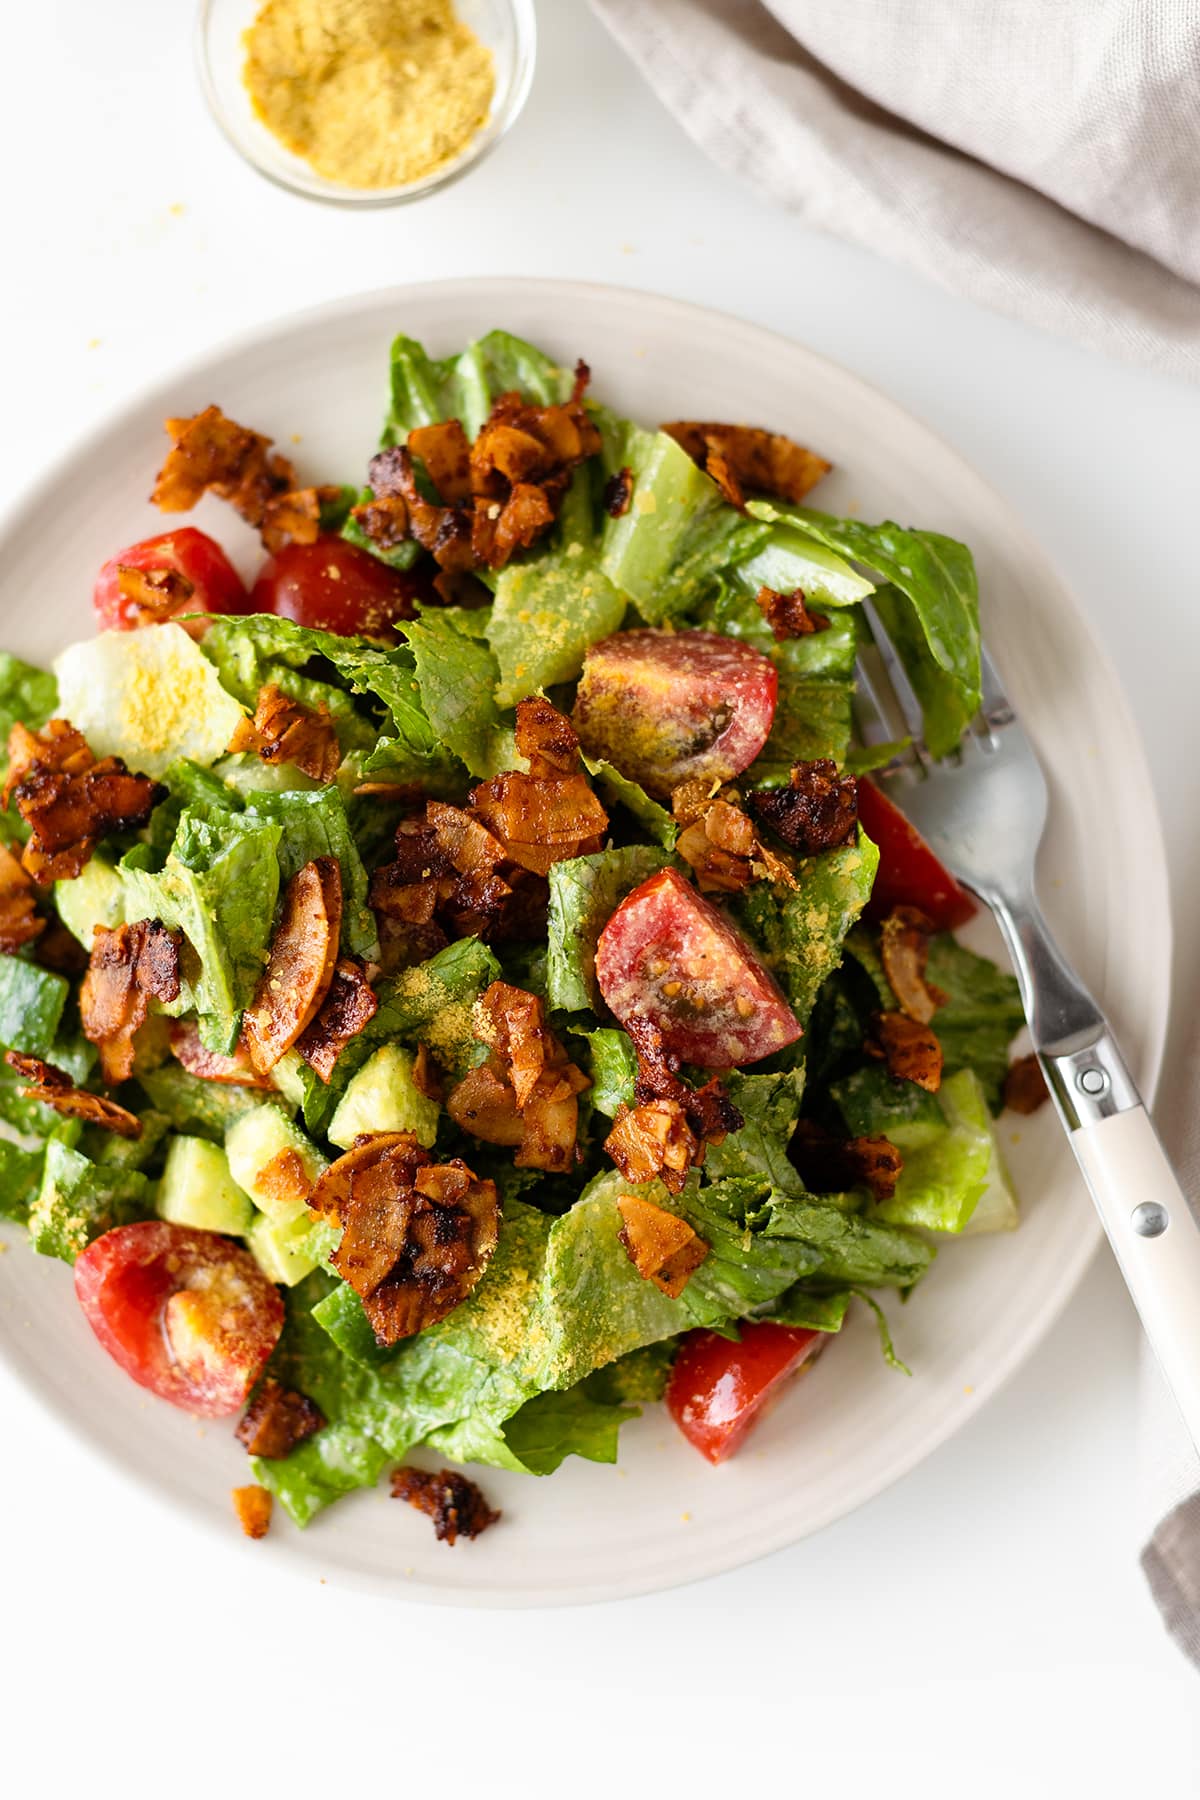 A green salad with romain, tomatoes, vegan coconut bacon and nutritional yeast - close up